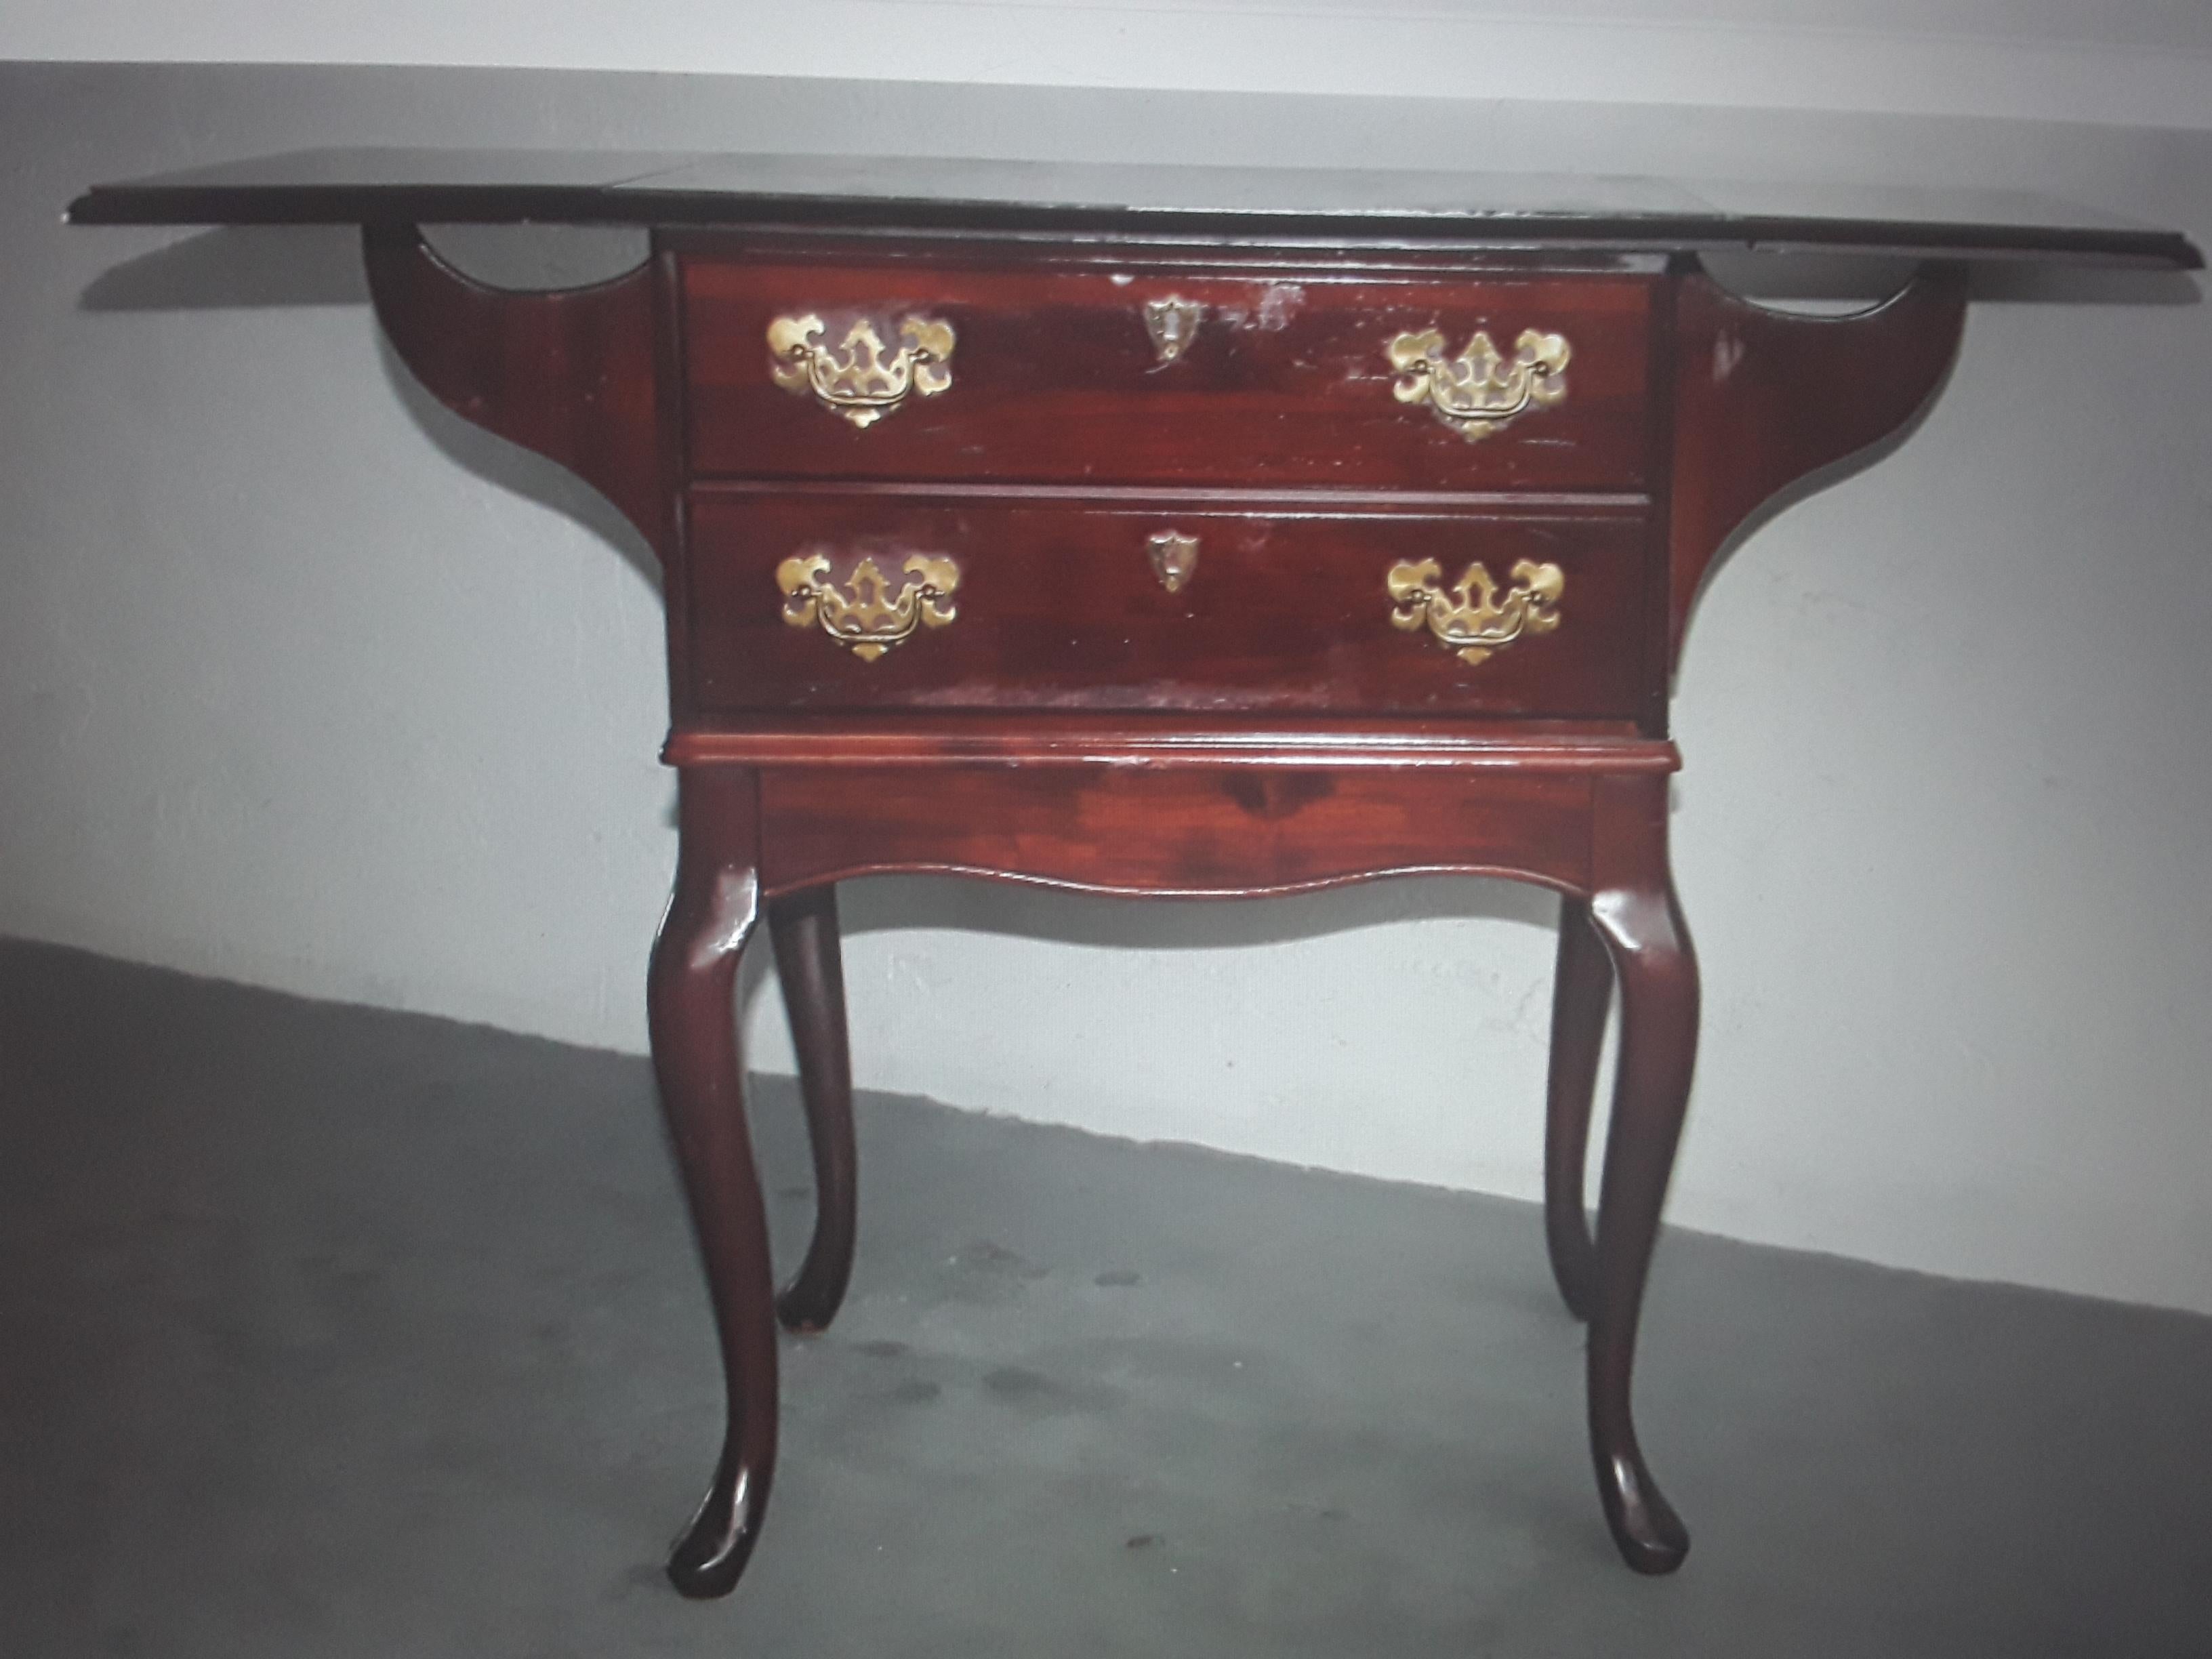 1950's Queen Anne style Lowboy Table with Extending Sides In Good Condition For Sale In Opa Locka, FL